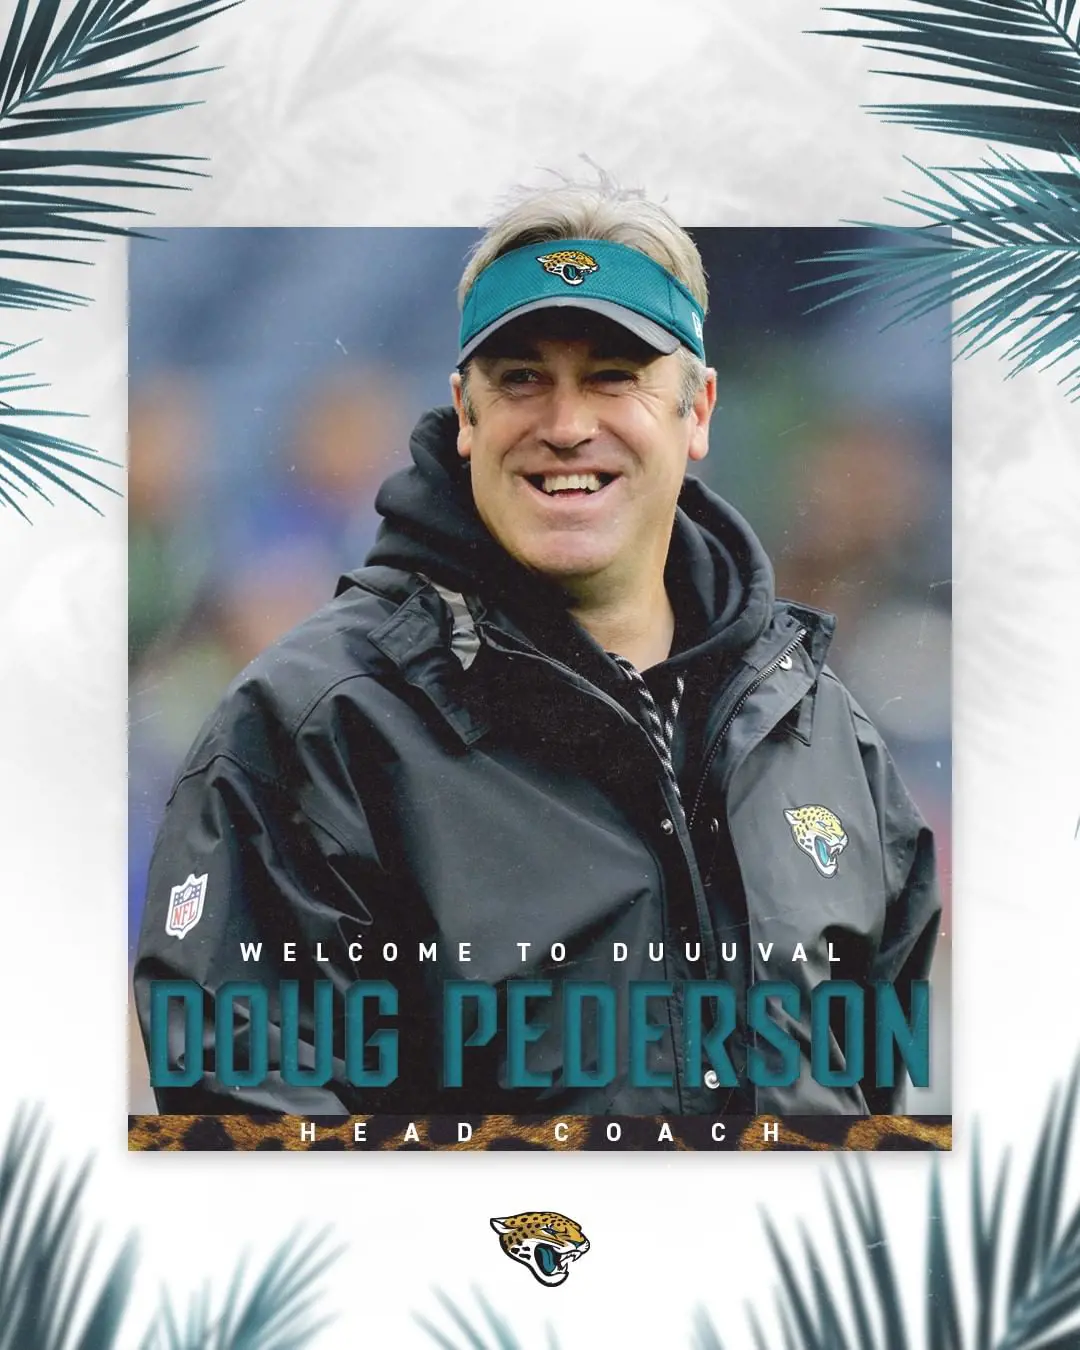 Doug Pederson after being hired by the Jaguars in 2022